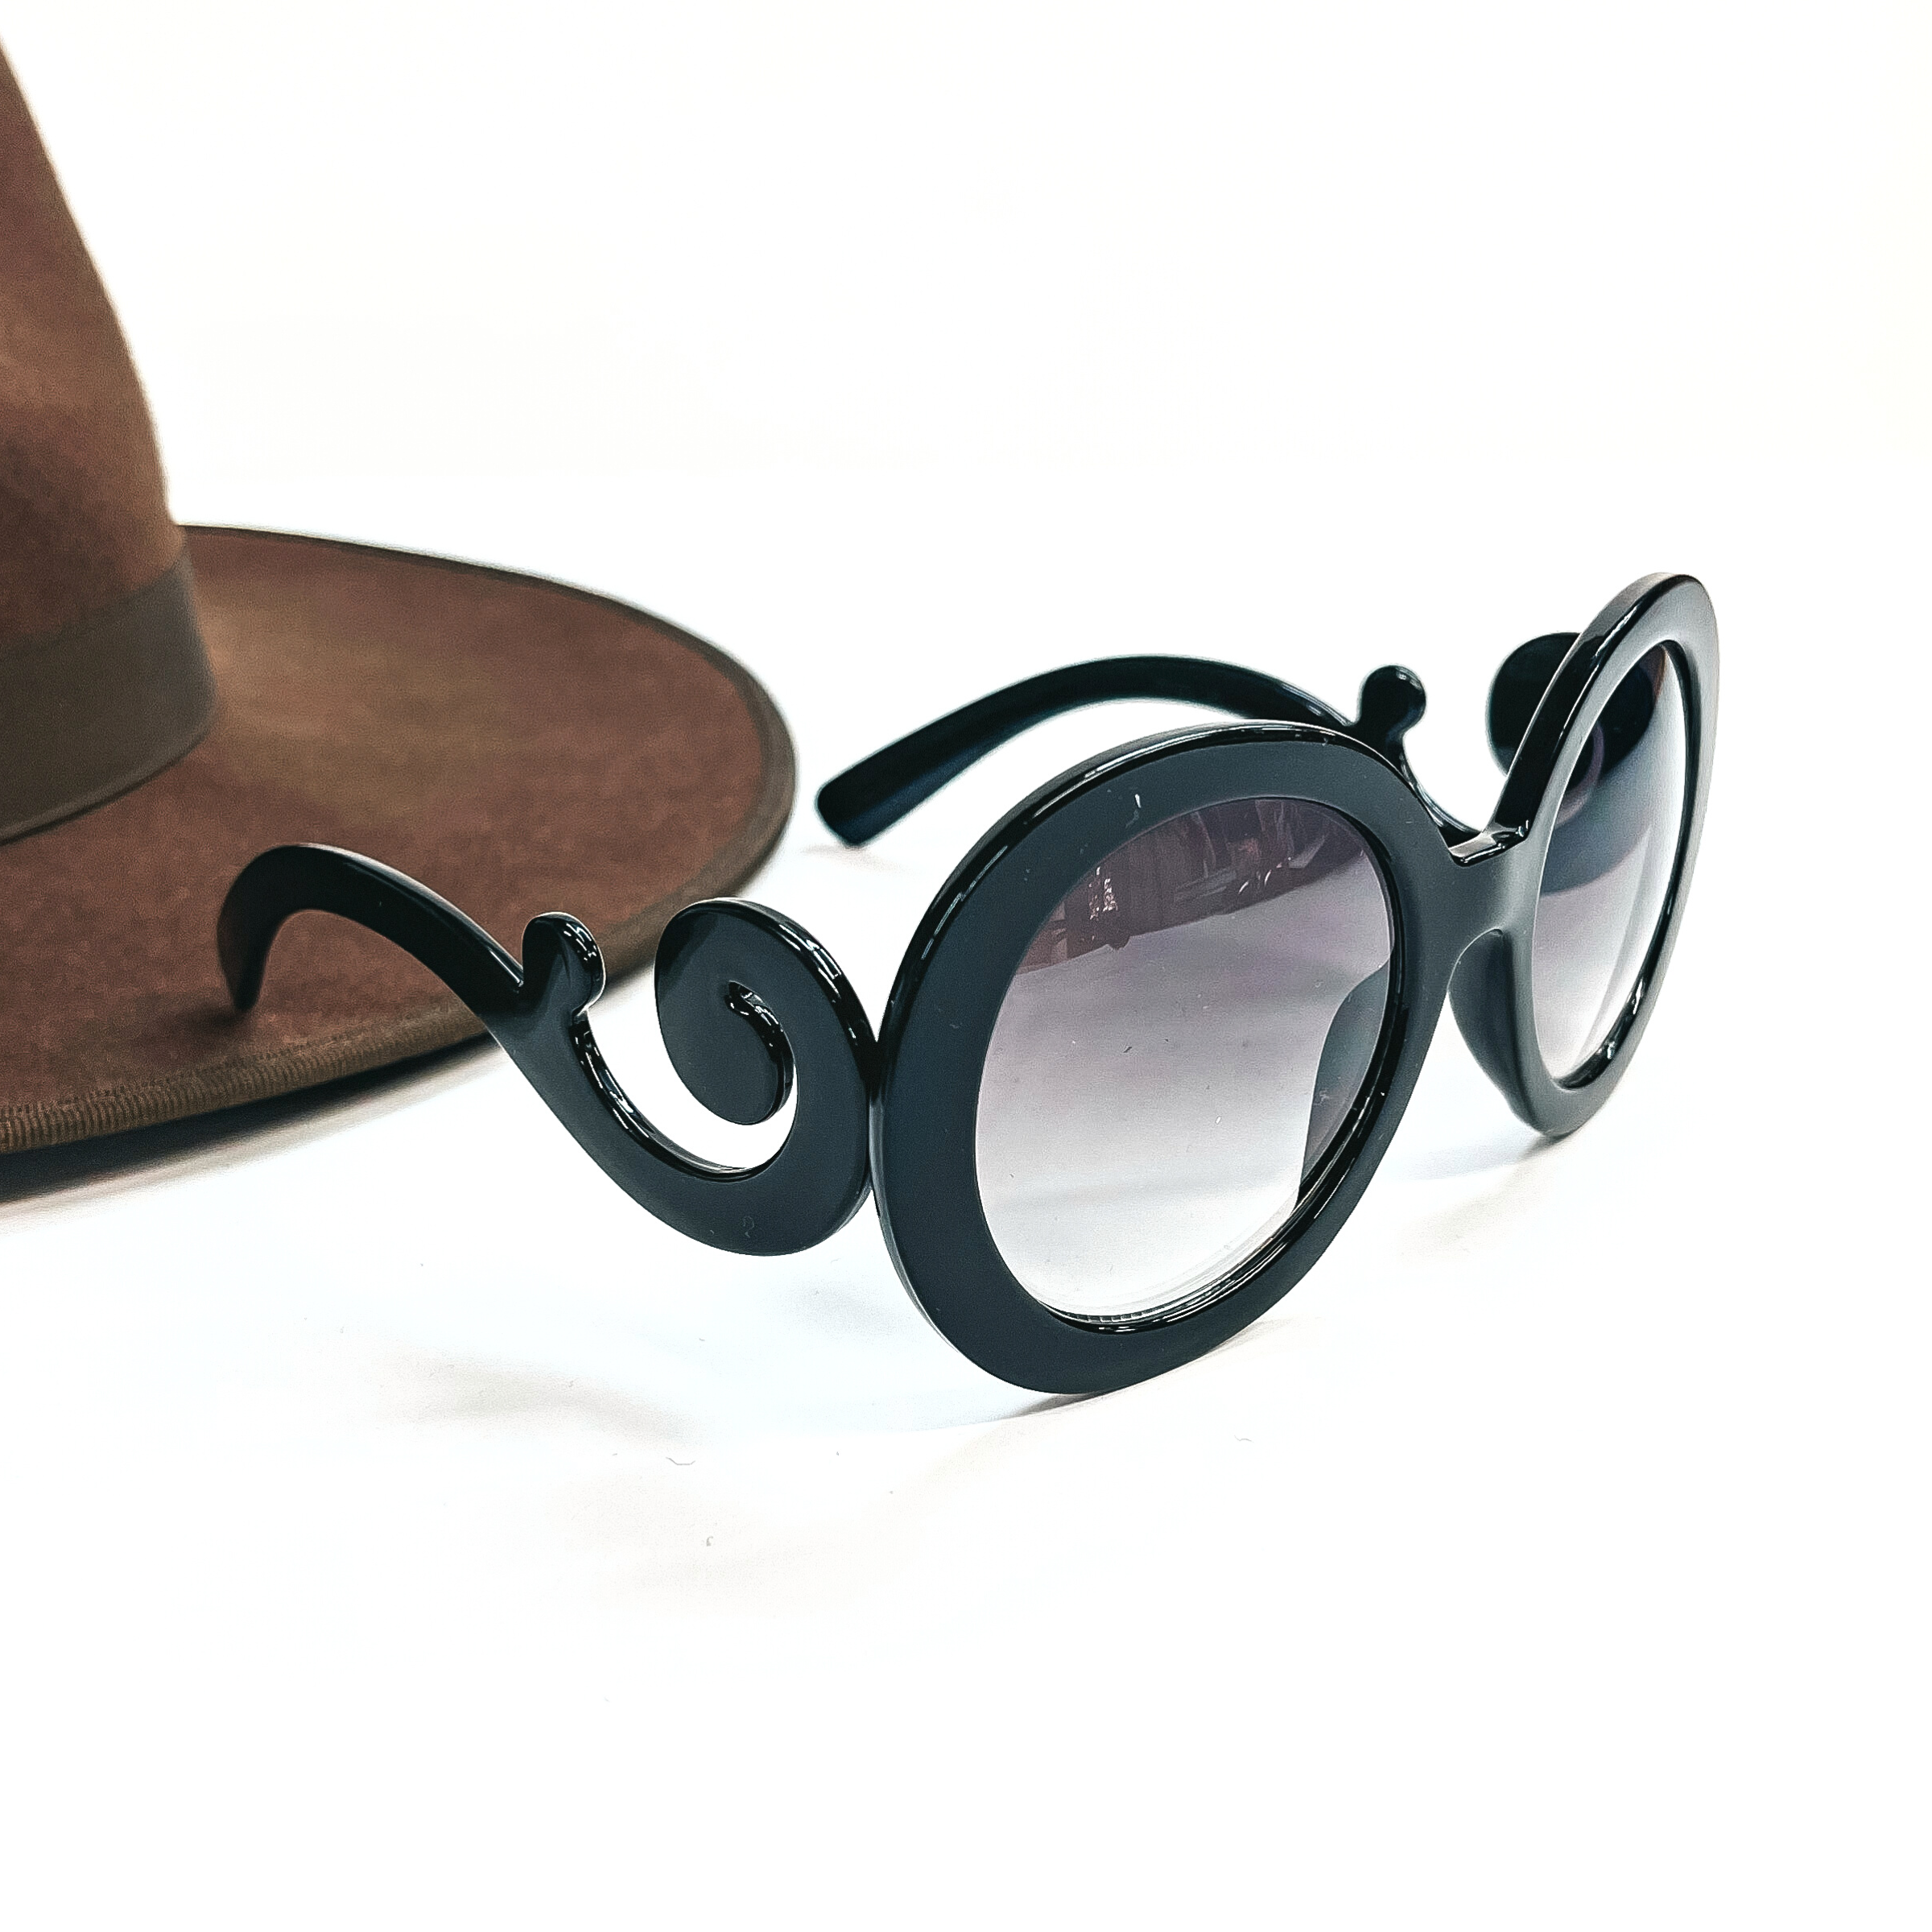 This is a black pair of sunglasses, the frame is black with a black/dark grey lense. The side parts of the sunglasses have a swirl. These sunglasses are taken on a white  background with a dark brown felt hat in the side as decor.